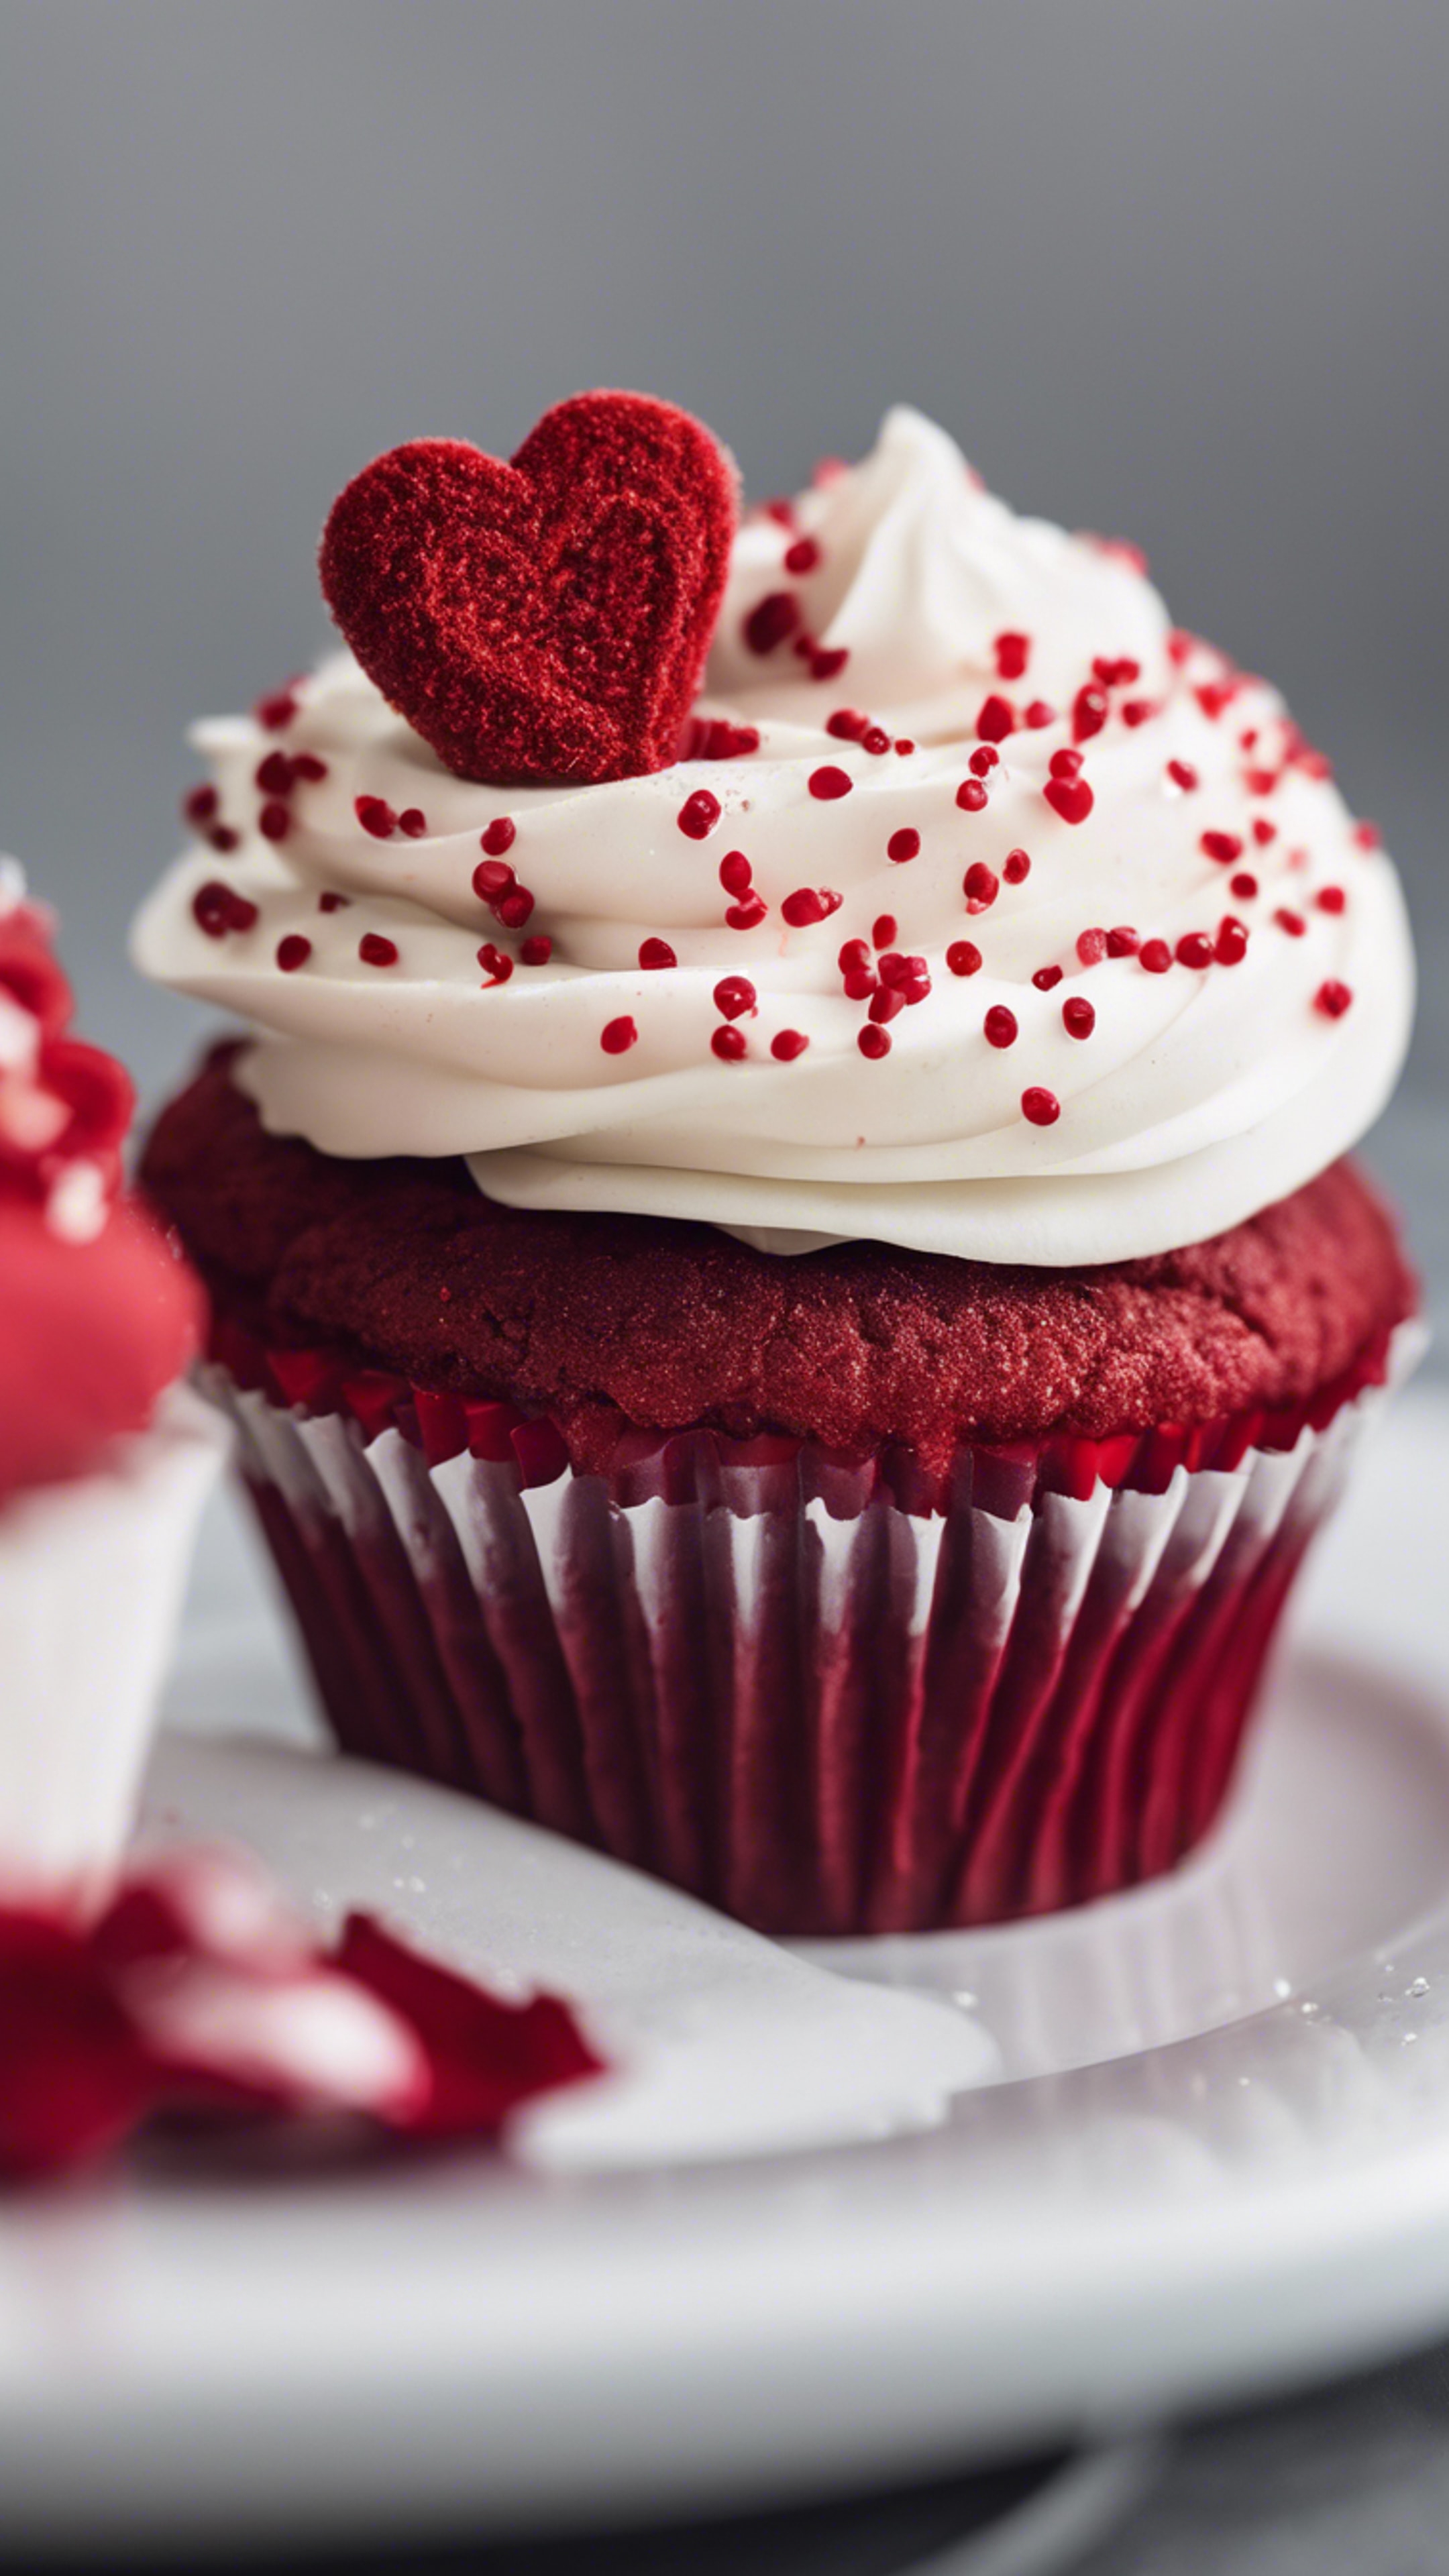 A red velvet cupcake with a heart-shaped sprinkle on top, presented on a white ceramic plate. Обои[2d98083c137b4c3e8f81]